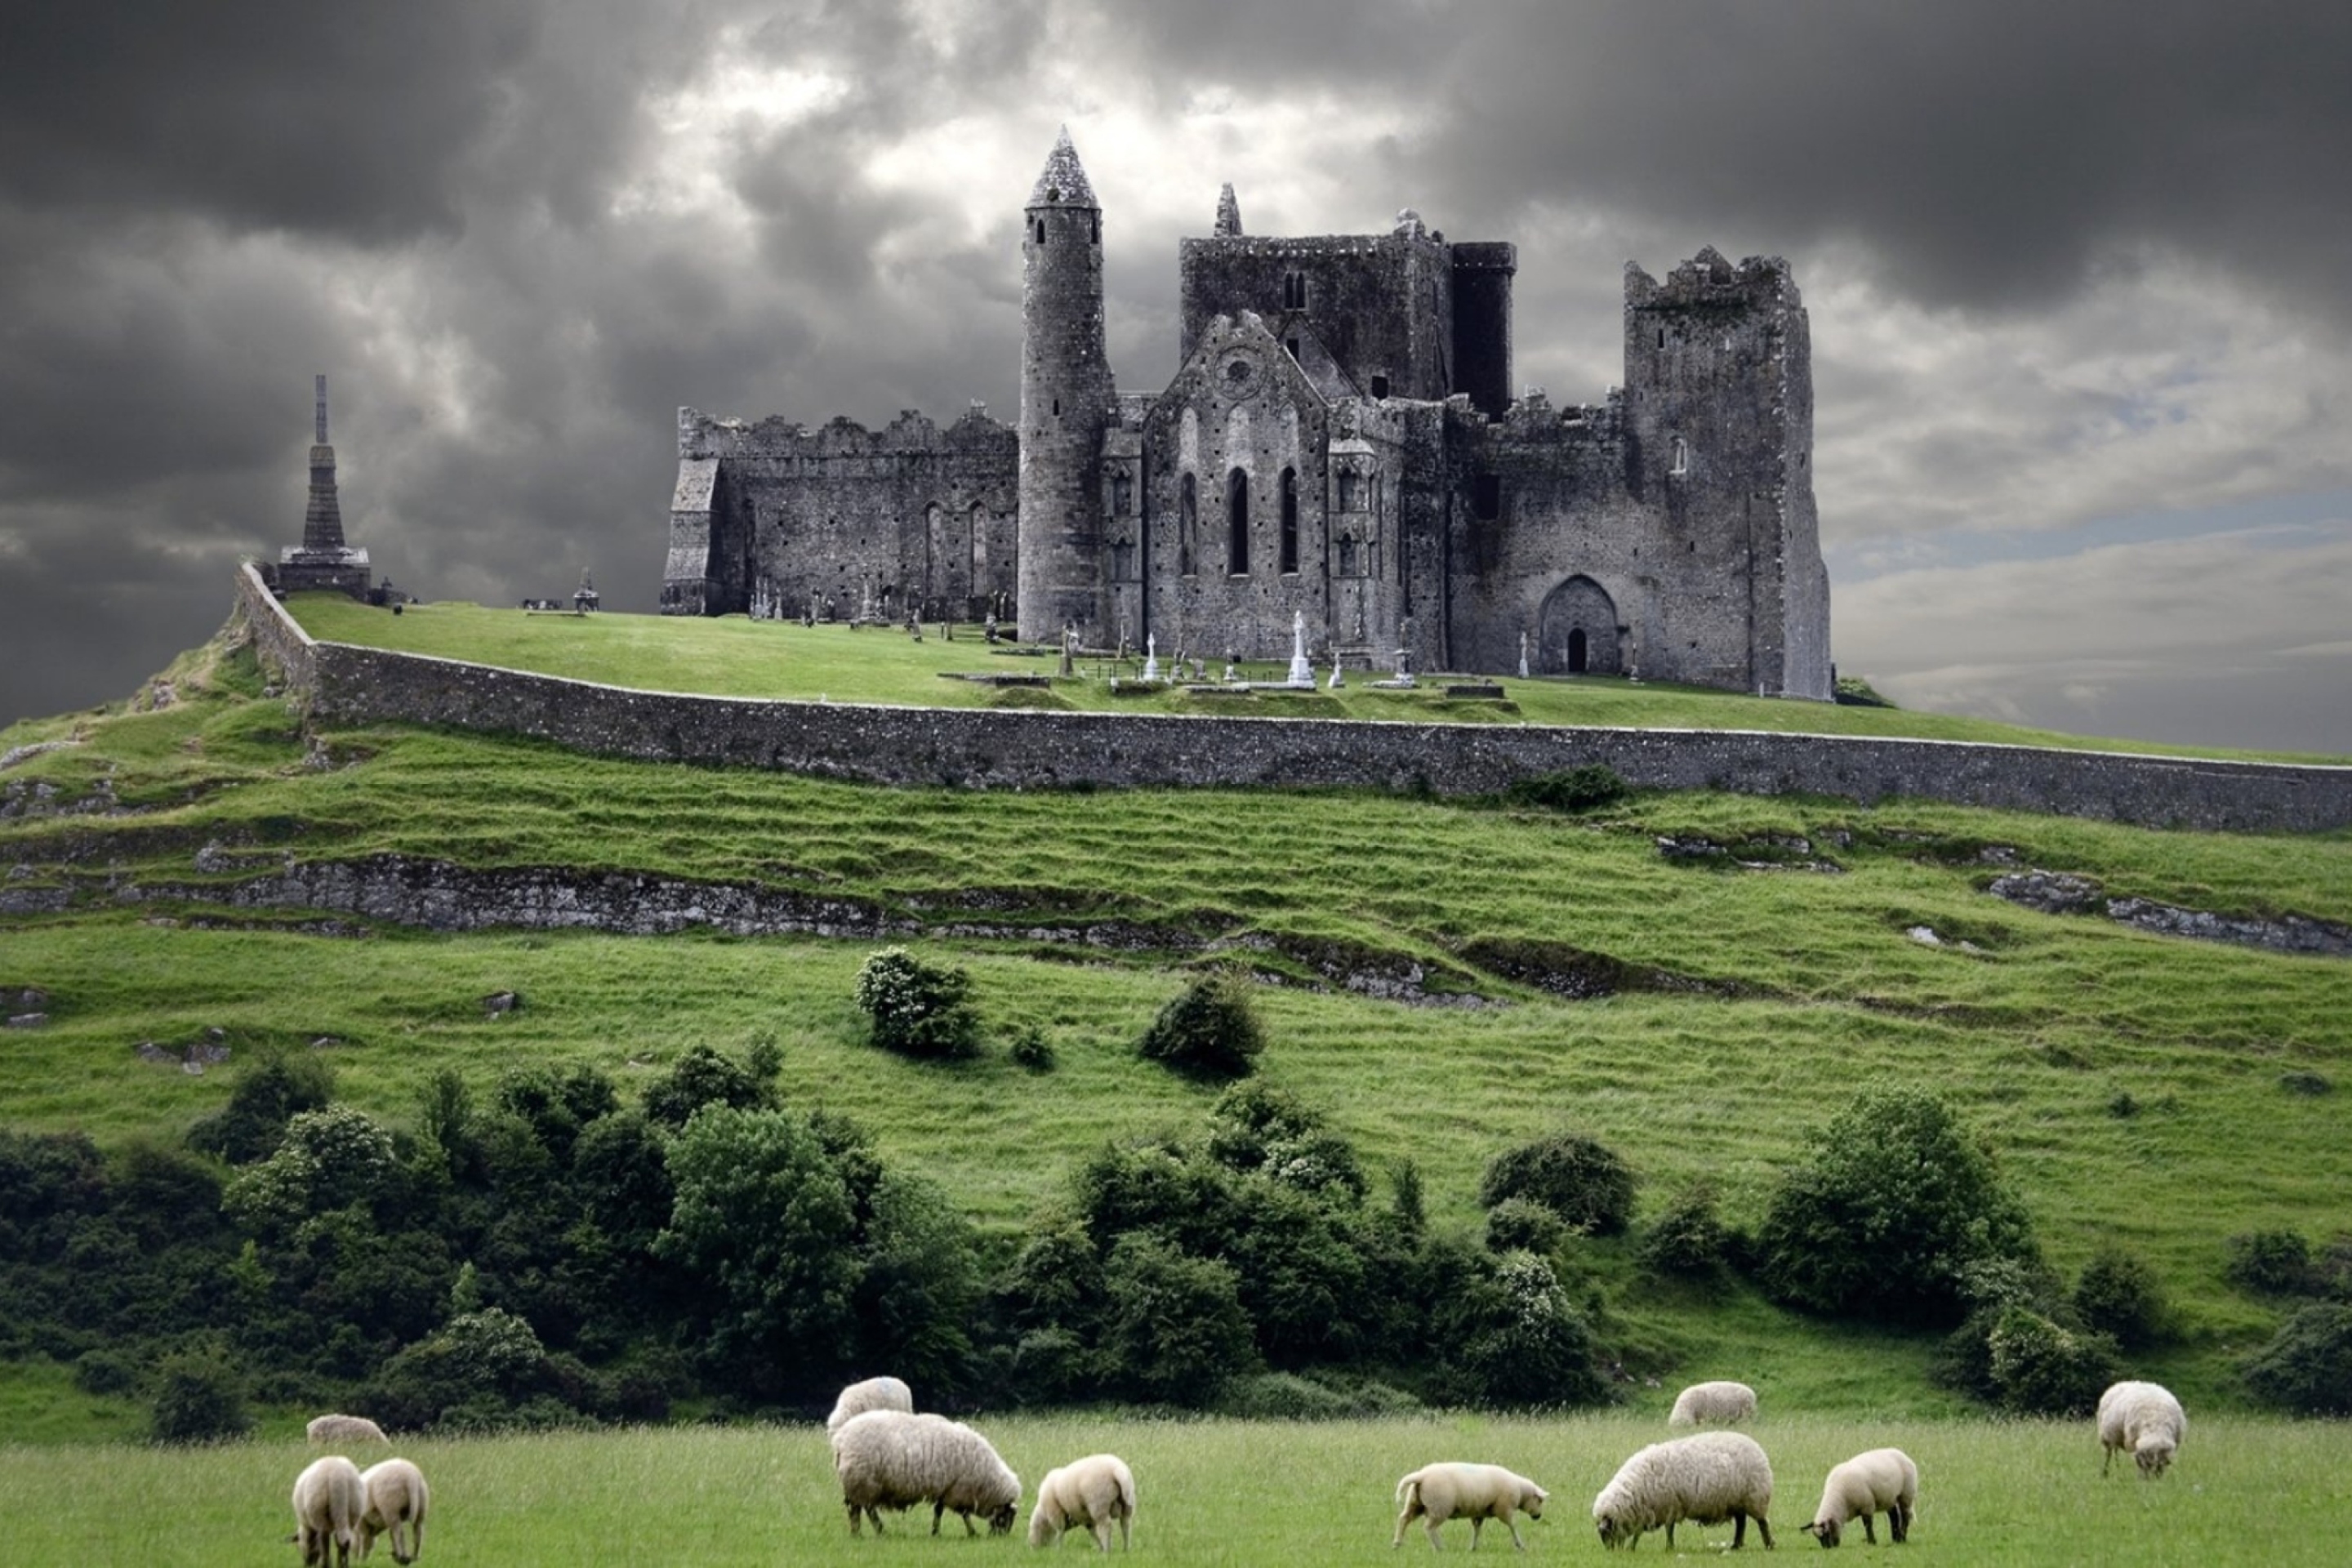 Das Ireland Landscape With Sheep And Castle Wallpaper 2880x1920